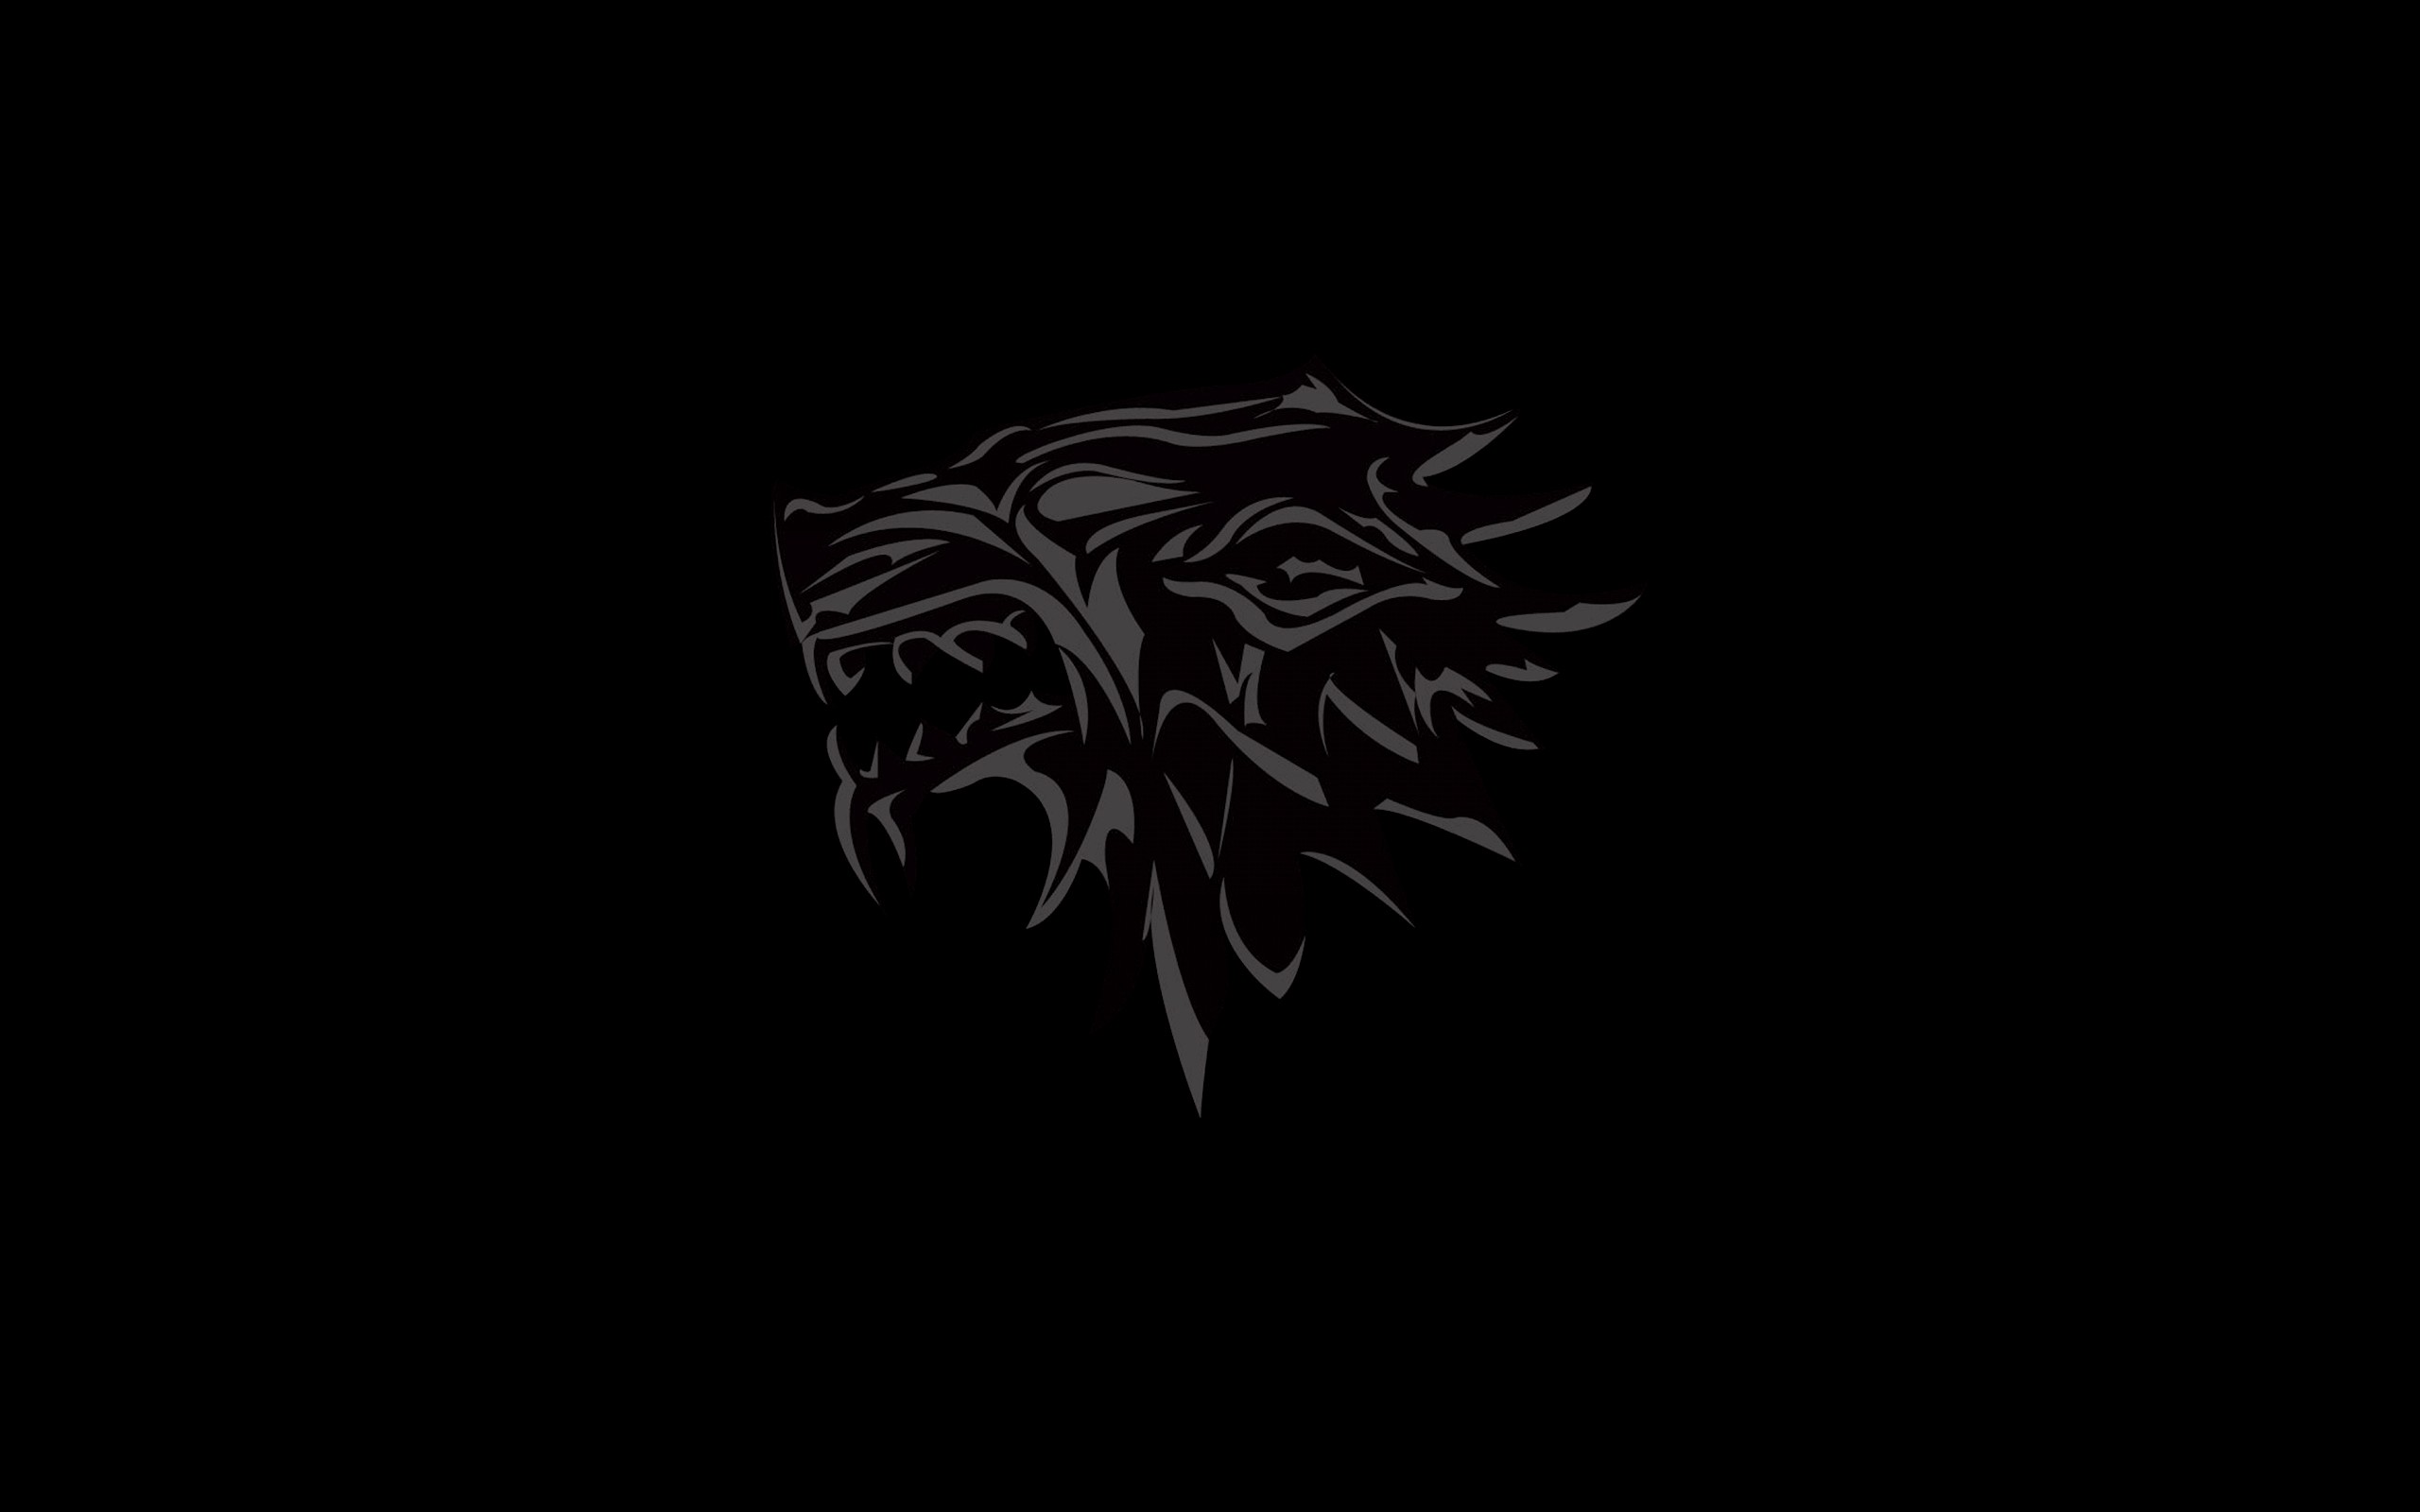 General 2560x1600 Game of Thrones Winter Is Coming fantasy art simple background TV series minimalism black background